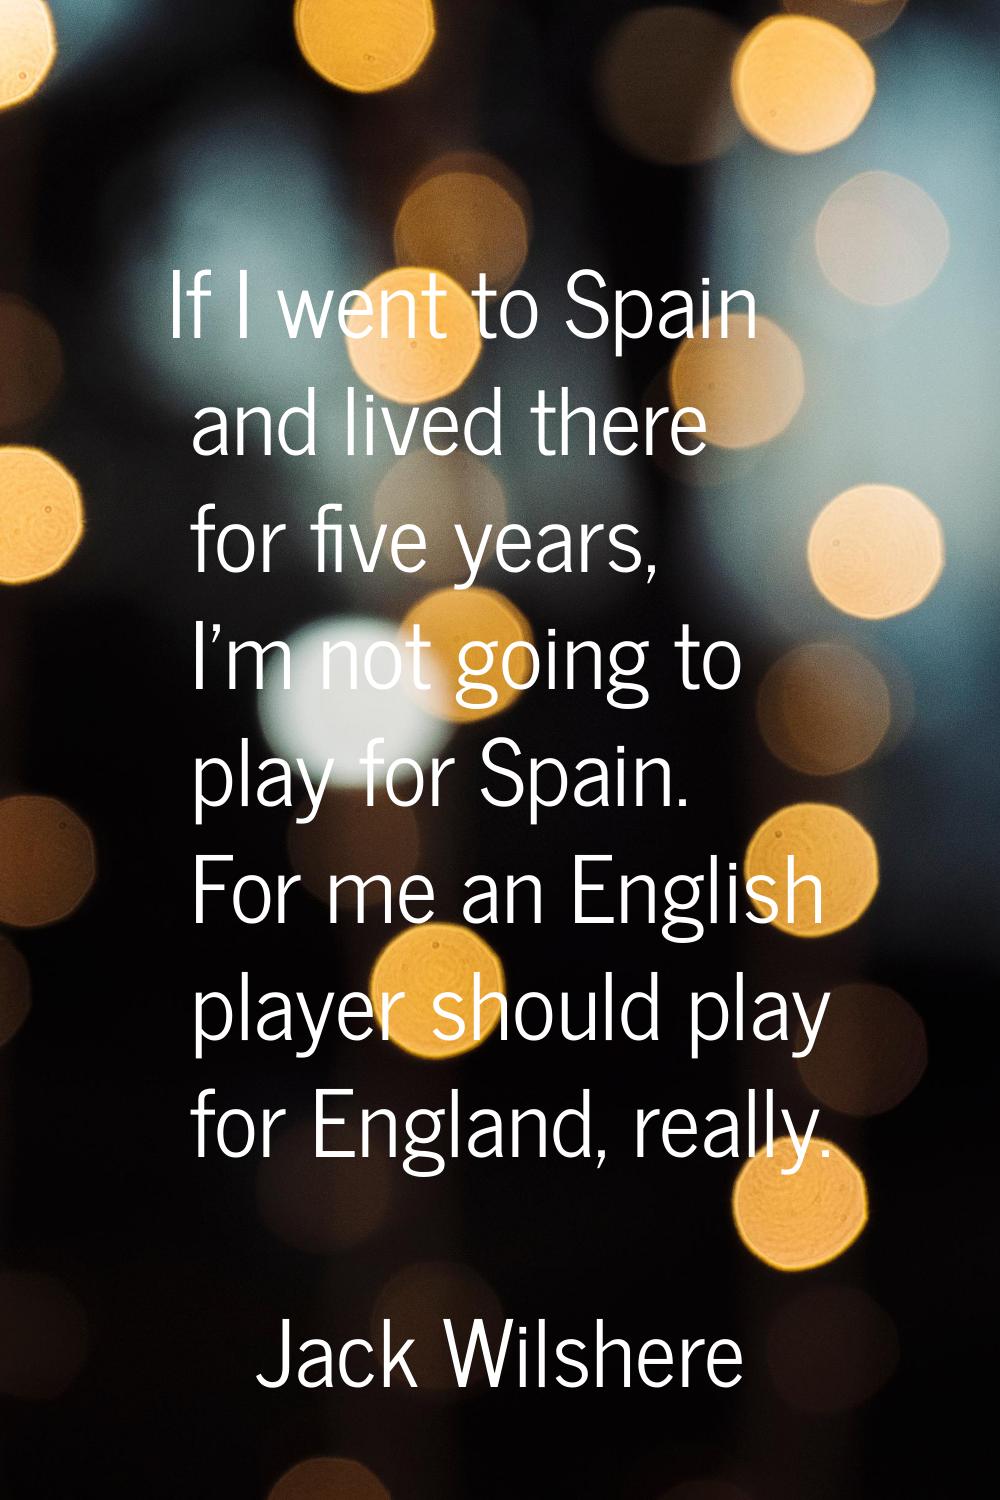 If I went to Spain and lived there for five years, I'm not going to play for Spain. For me an Engli